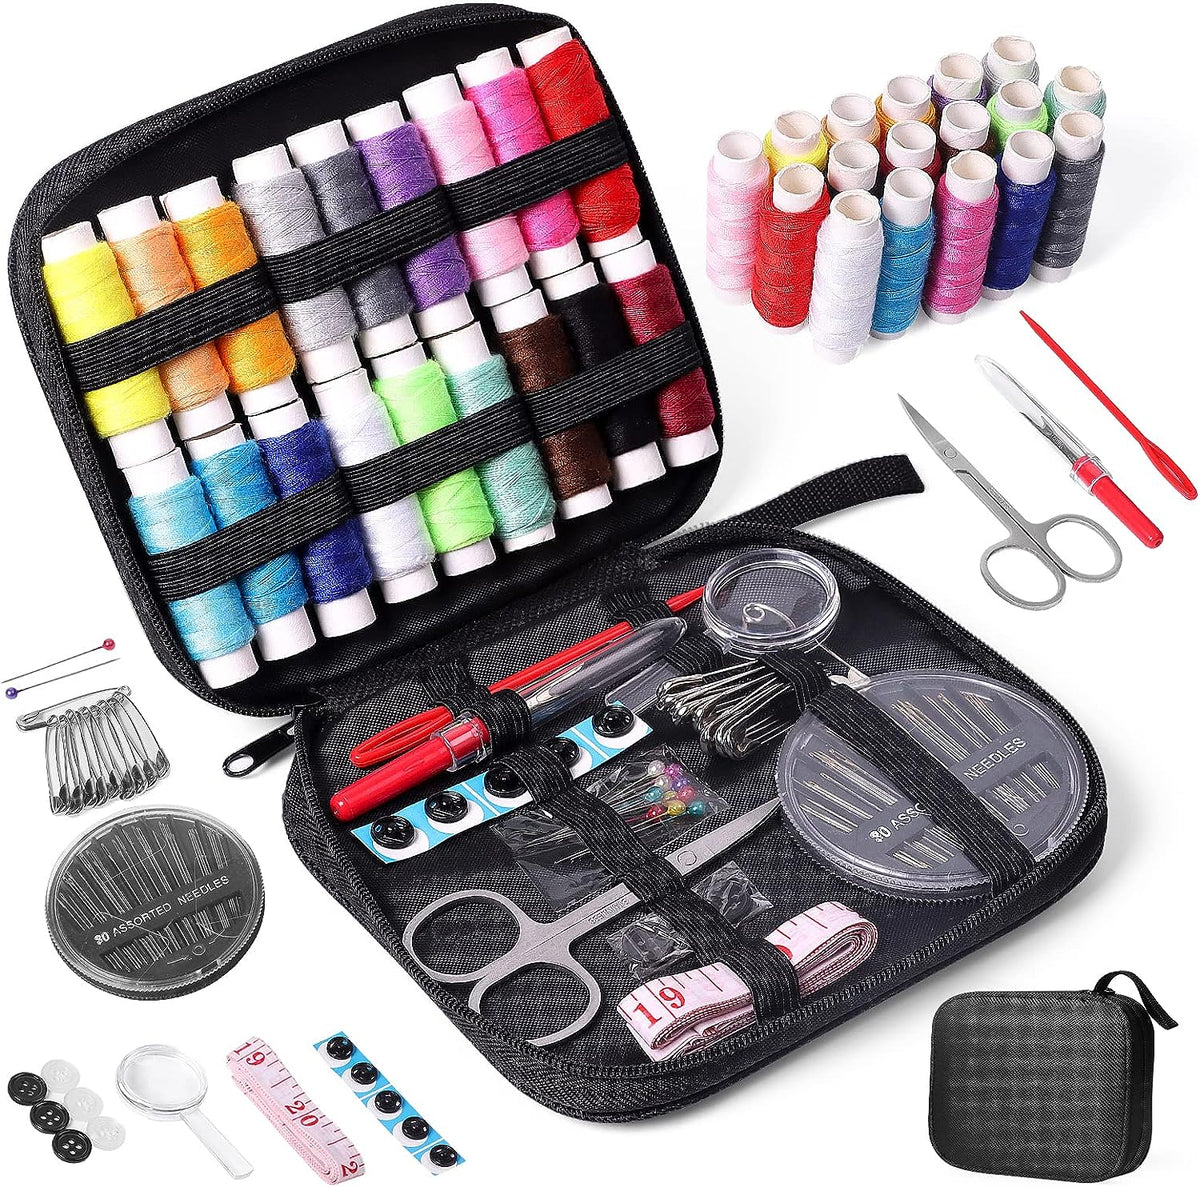 Sewing Kit with Case Portable Sewing Supplies for Home Traveler, Adults, Beginner, Emergency, Kids Contains Thread, Scissors, Needles, Measure etc